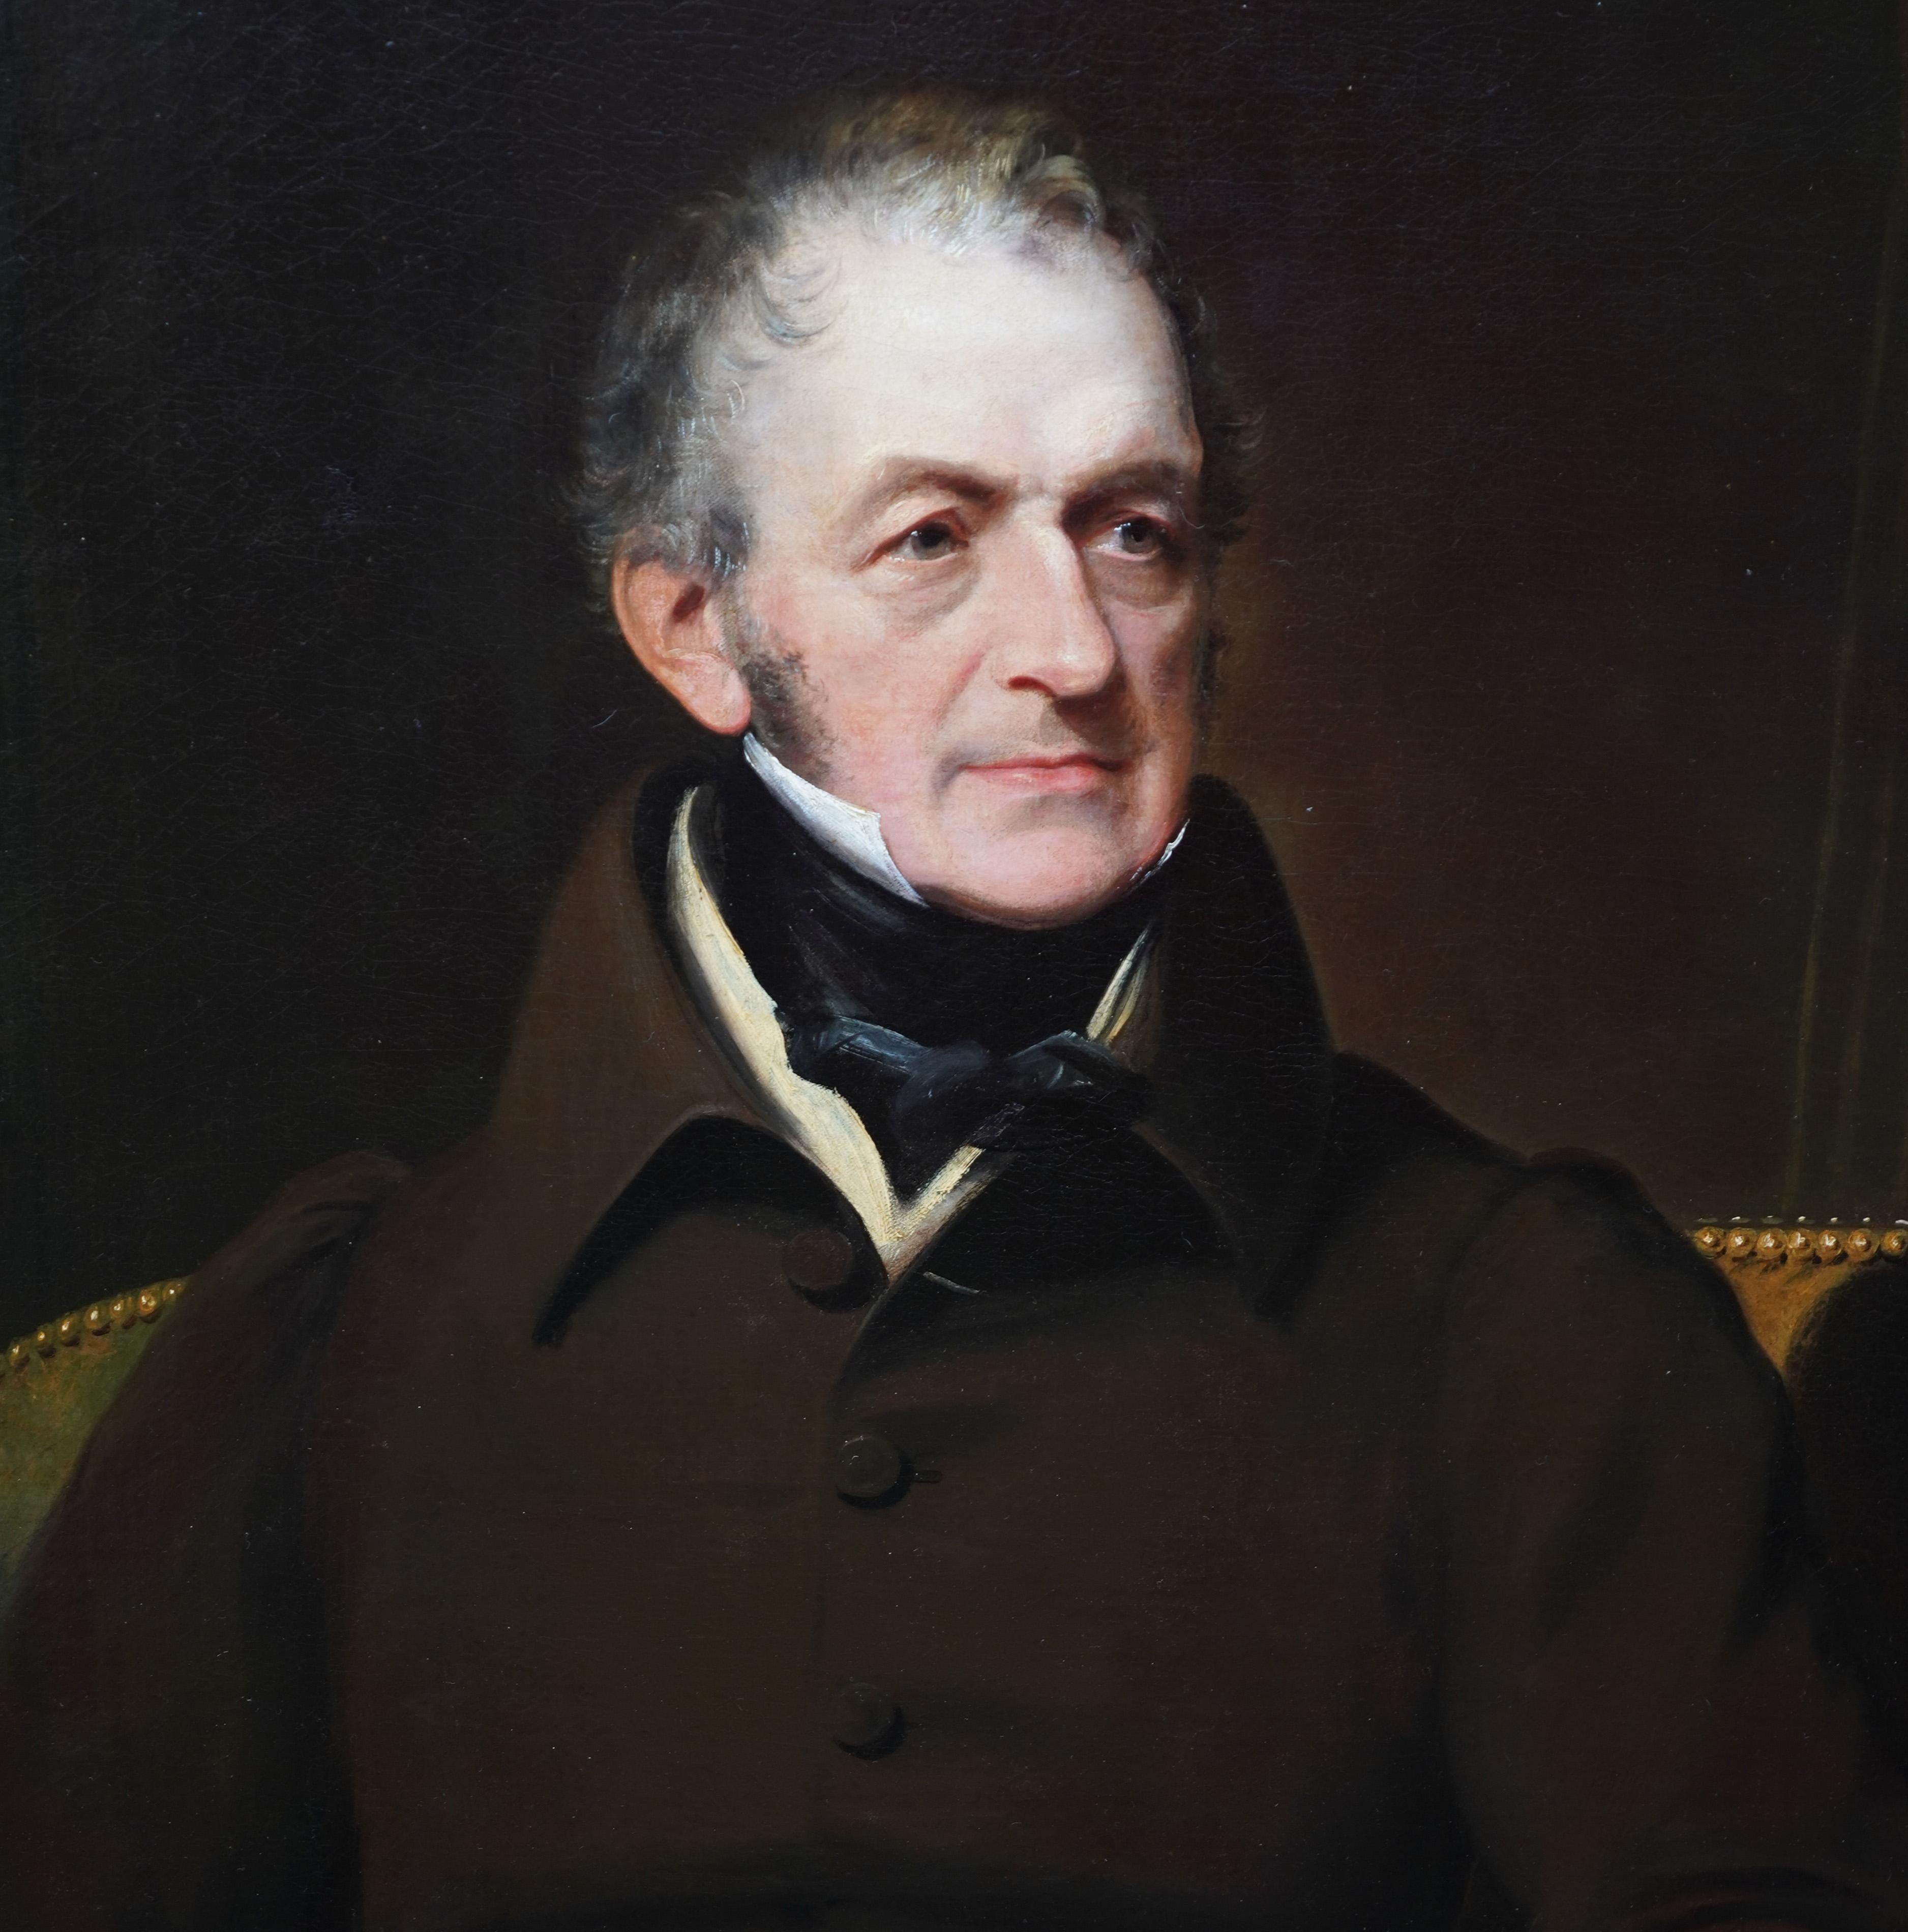 This striking British 19th century portrait oil painting is attributed to the circle of Sir Thomas Lawrence. Painted circa 1820 it is the portrait of a seated gentleman in a brown high collared coat. The detail in his face is fantastic. The interior